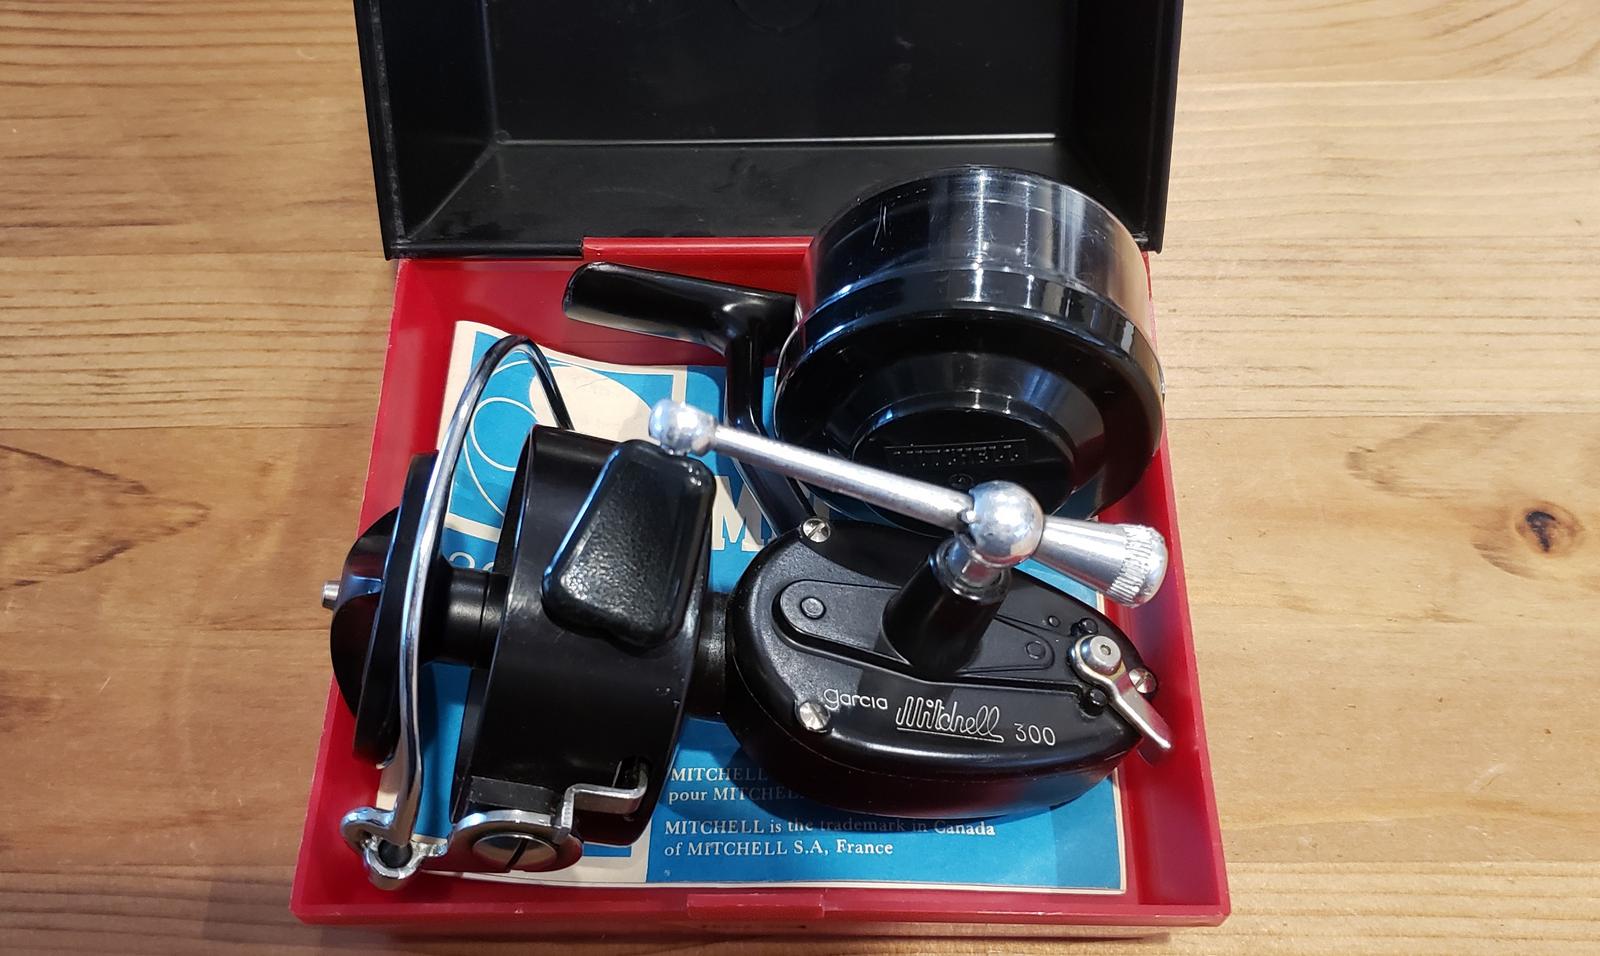 Very nice Garcia Mitchell 300 308 spinning reel handle looks good France